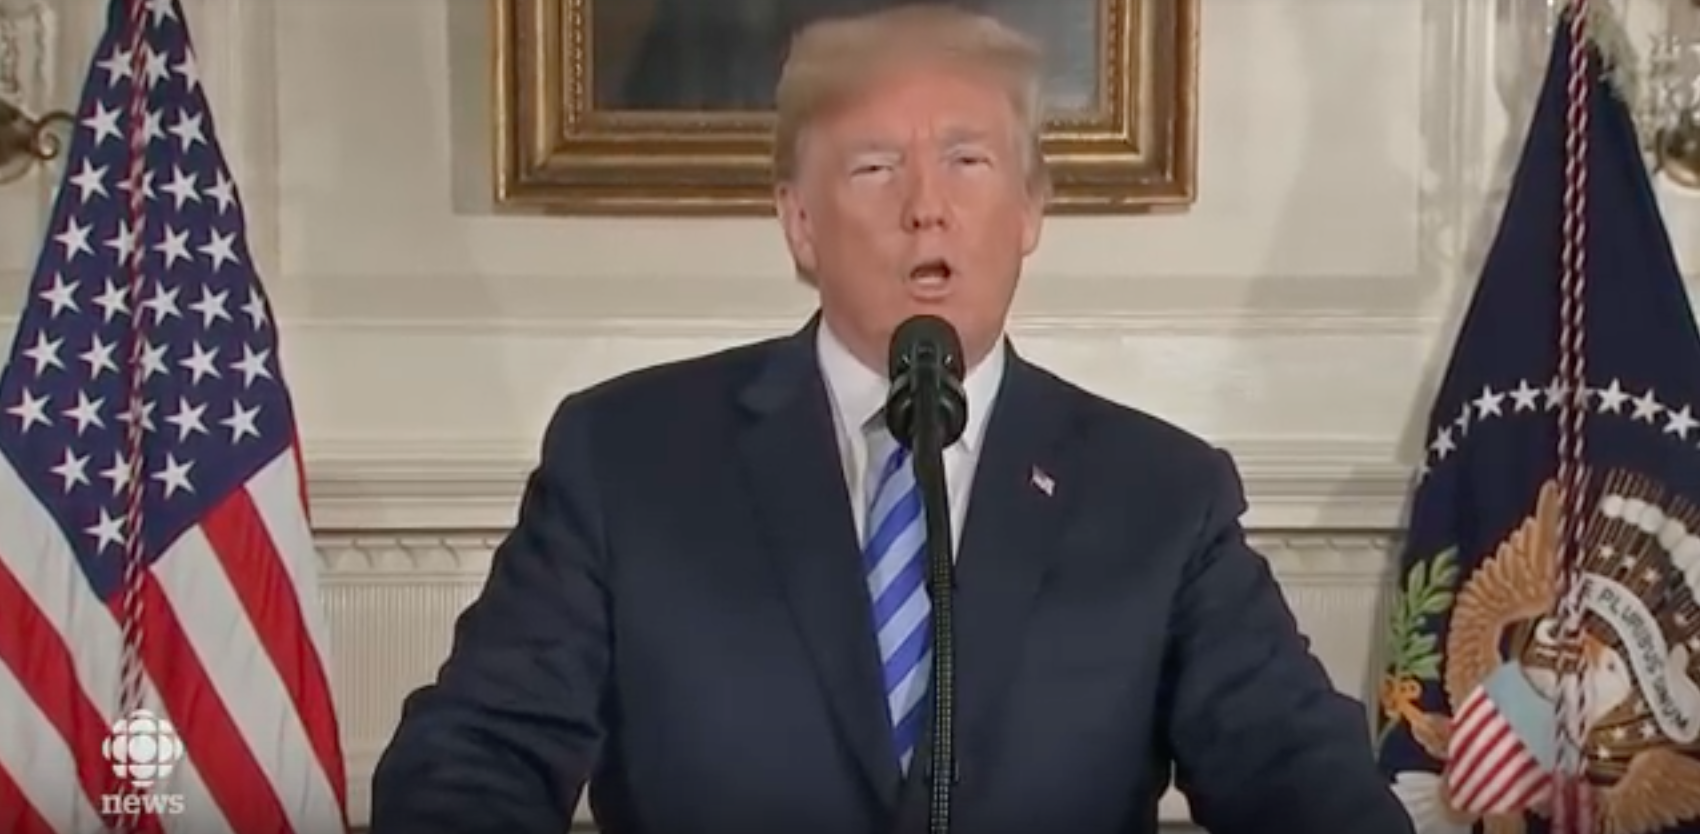 President Trump announcing the U.S. pullout from the Joint Comprehensive Plan of Action (JCPOA) on May 8, 2018.